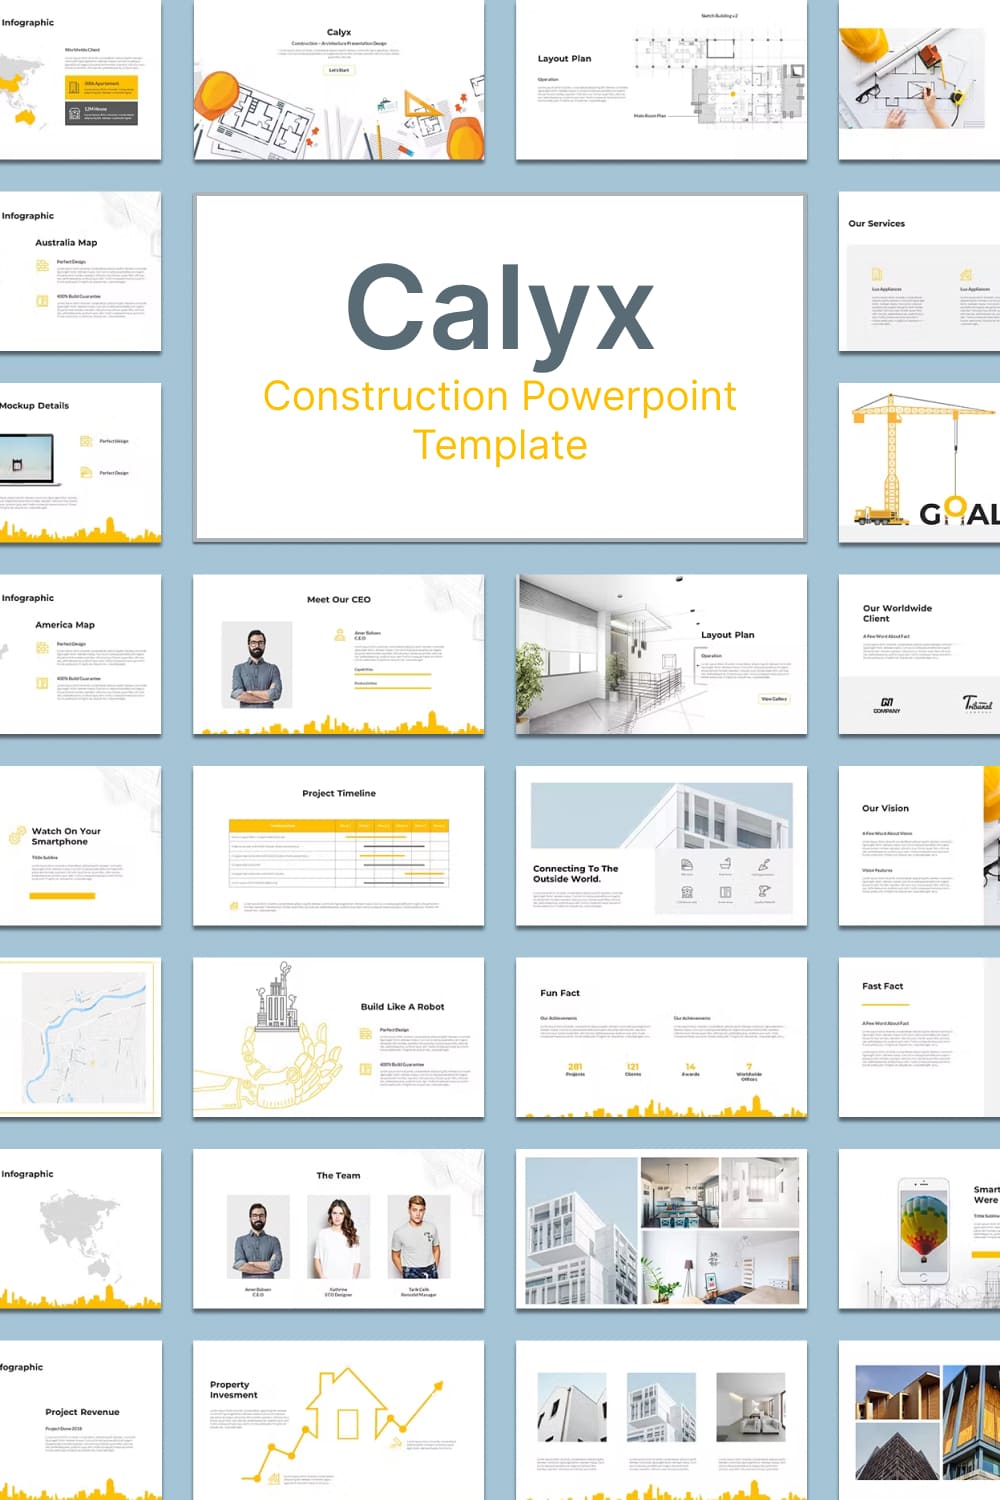 Calyx construction powerpoint template - pinterest image preview.